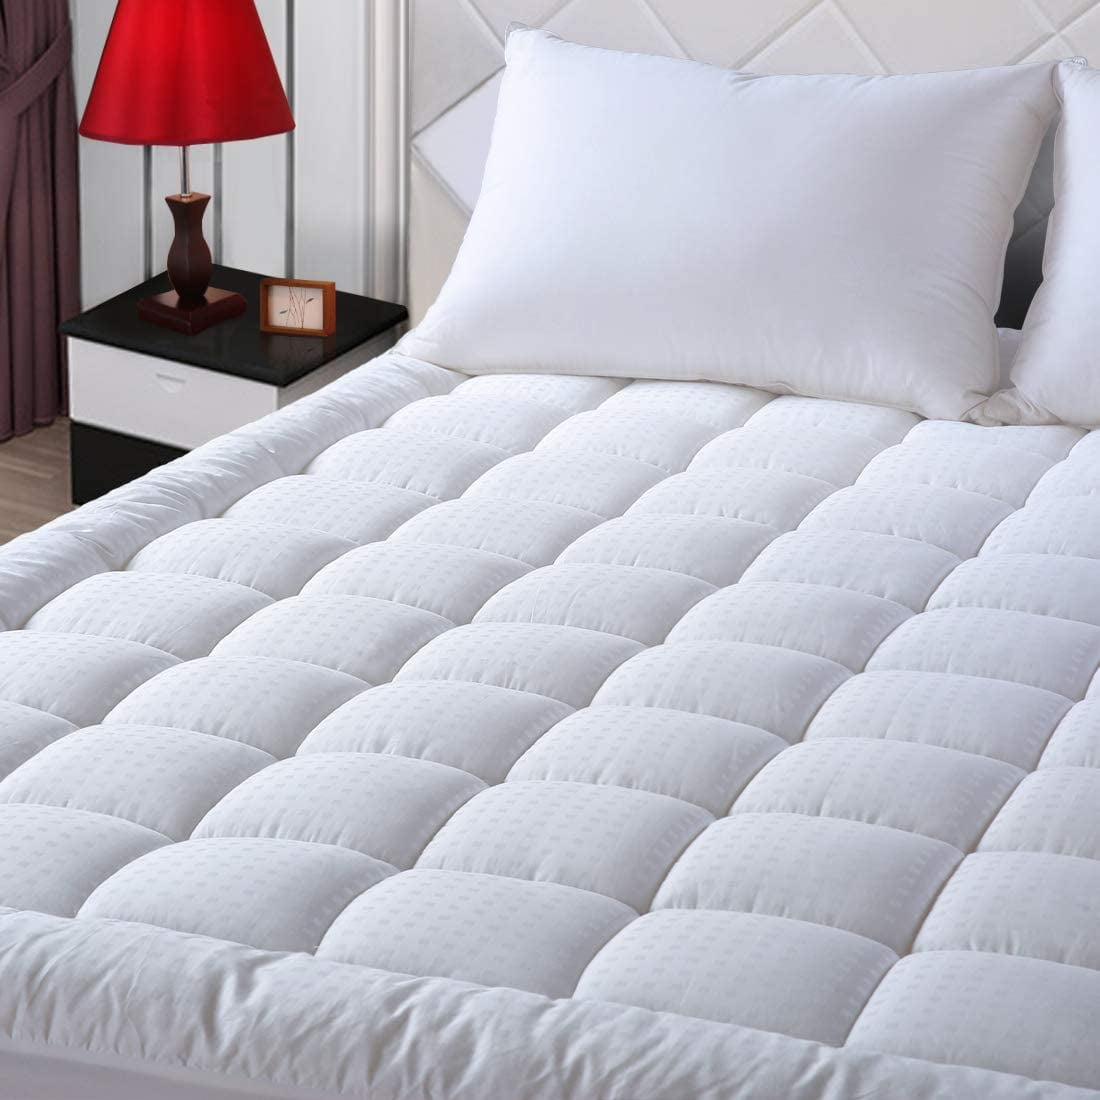 LUXURY QUILTED EXTRA DEEP MATTRESS PROTECTOR FITTED COVER ANTI ALLERGY All SIZES 